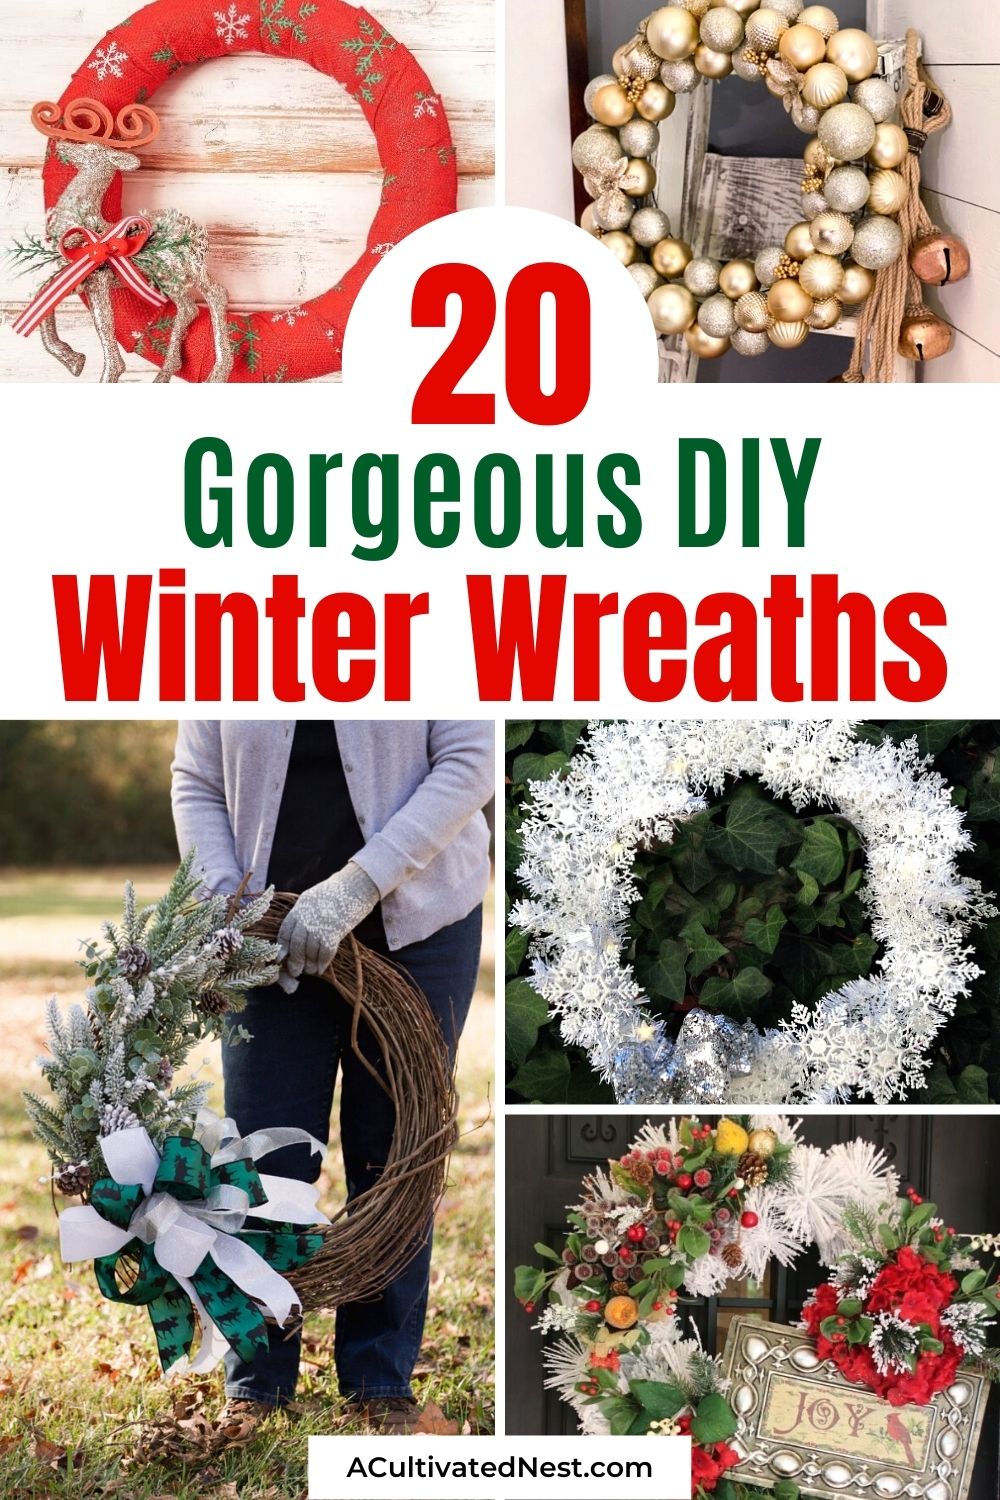 20 DIY Winter Wreaths You Will Love- A fun and frugal way to make your home festive this winter is with one of these 20 DIY winter wreaths! There are so many beautiful homemade wreaths you can make!! | DIY Christmas wreaths, DIY winter décor, #DIY #diyWreaths #winterDecor #wreaths #ACultivatedNest